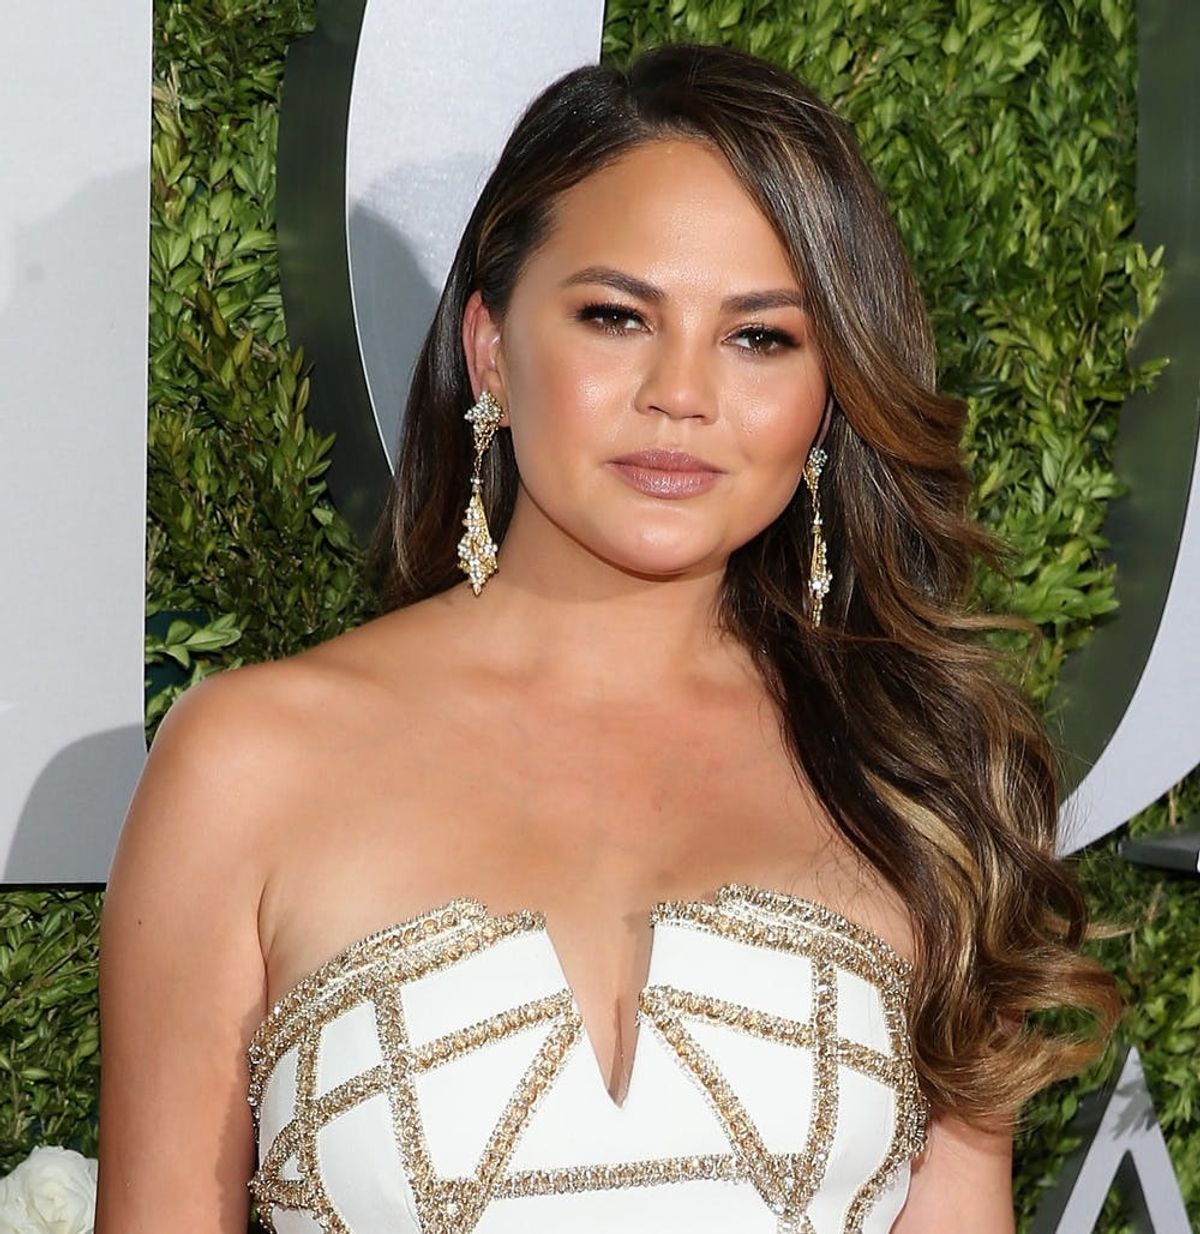 Chrissy Teigen Weighs in on the Logan Paul YouTube Controversy